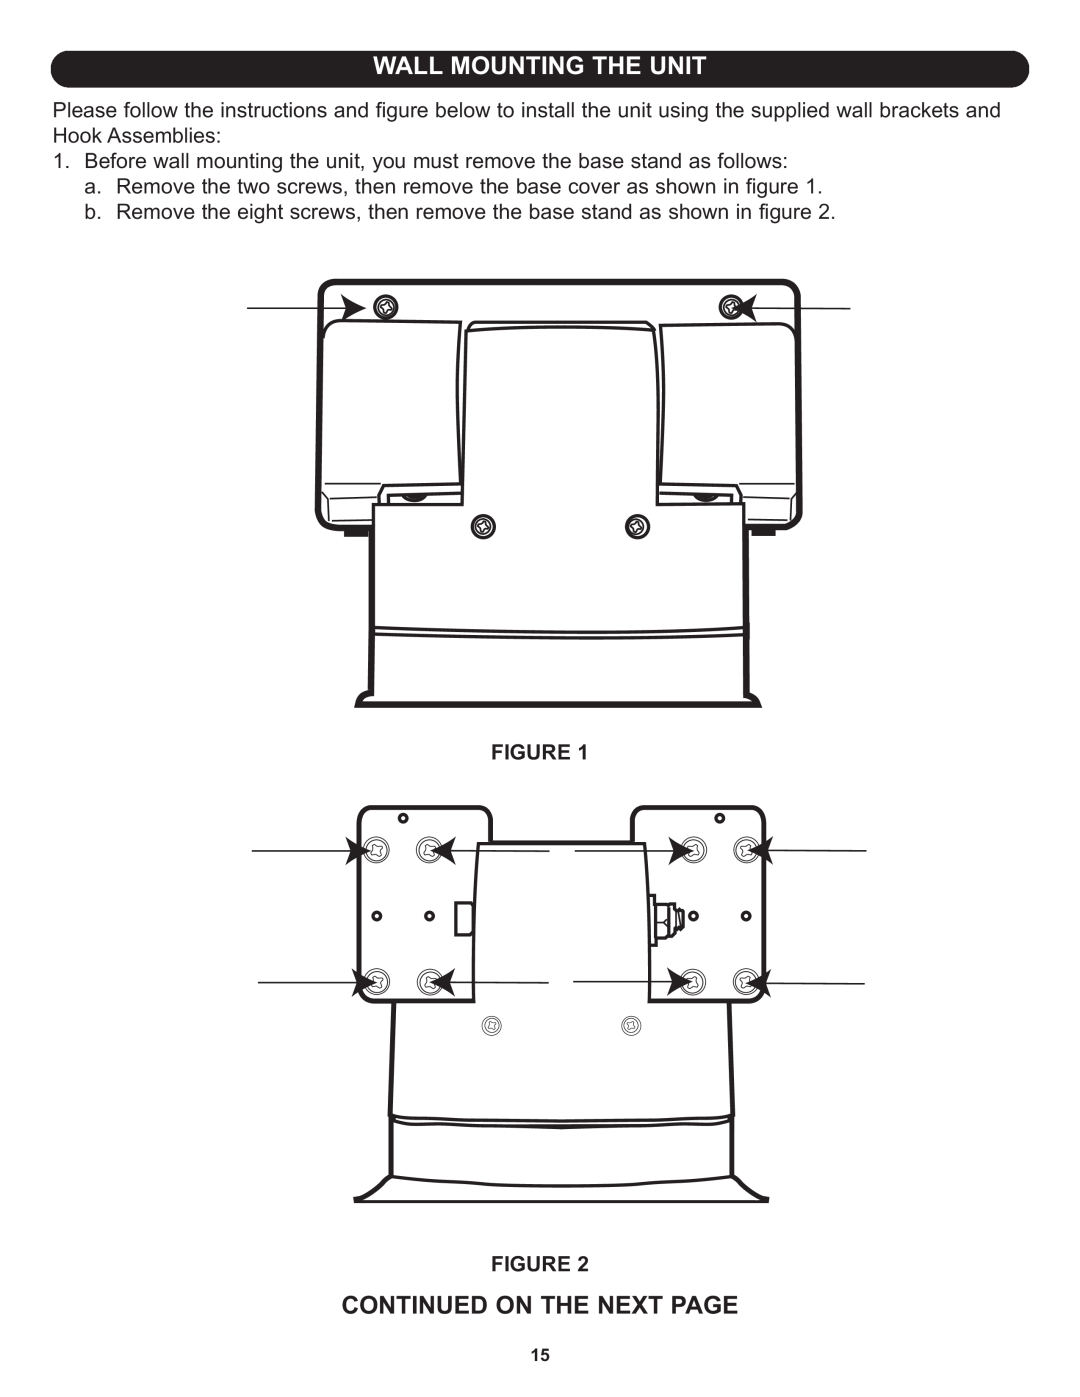 Memorex MT3010OM manual Wall Mounting The Unit, Continued On The Next Page 